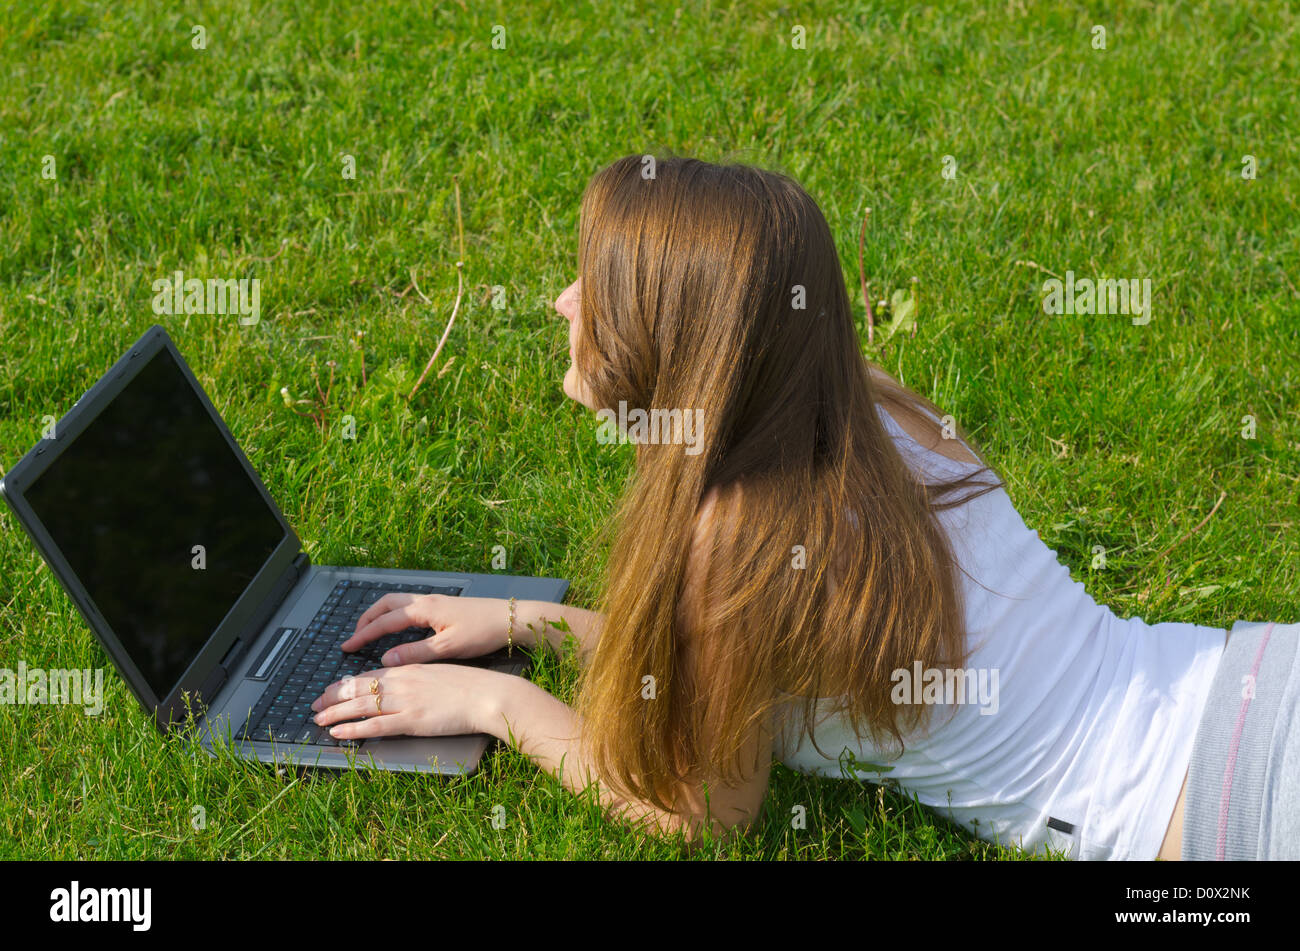 High angle view of a young woman with long brunette hair lying on the grass working on her laptop Stock Photo